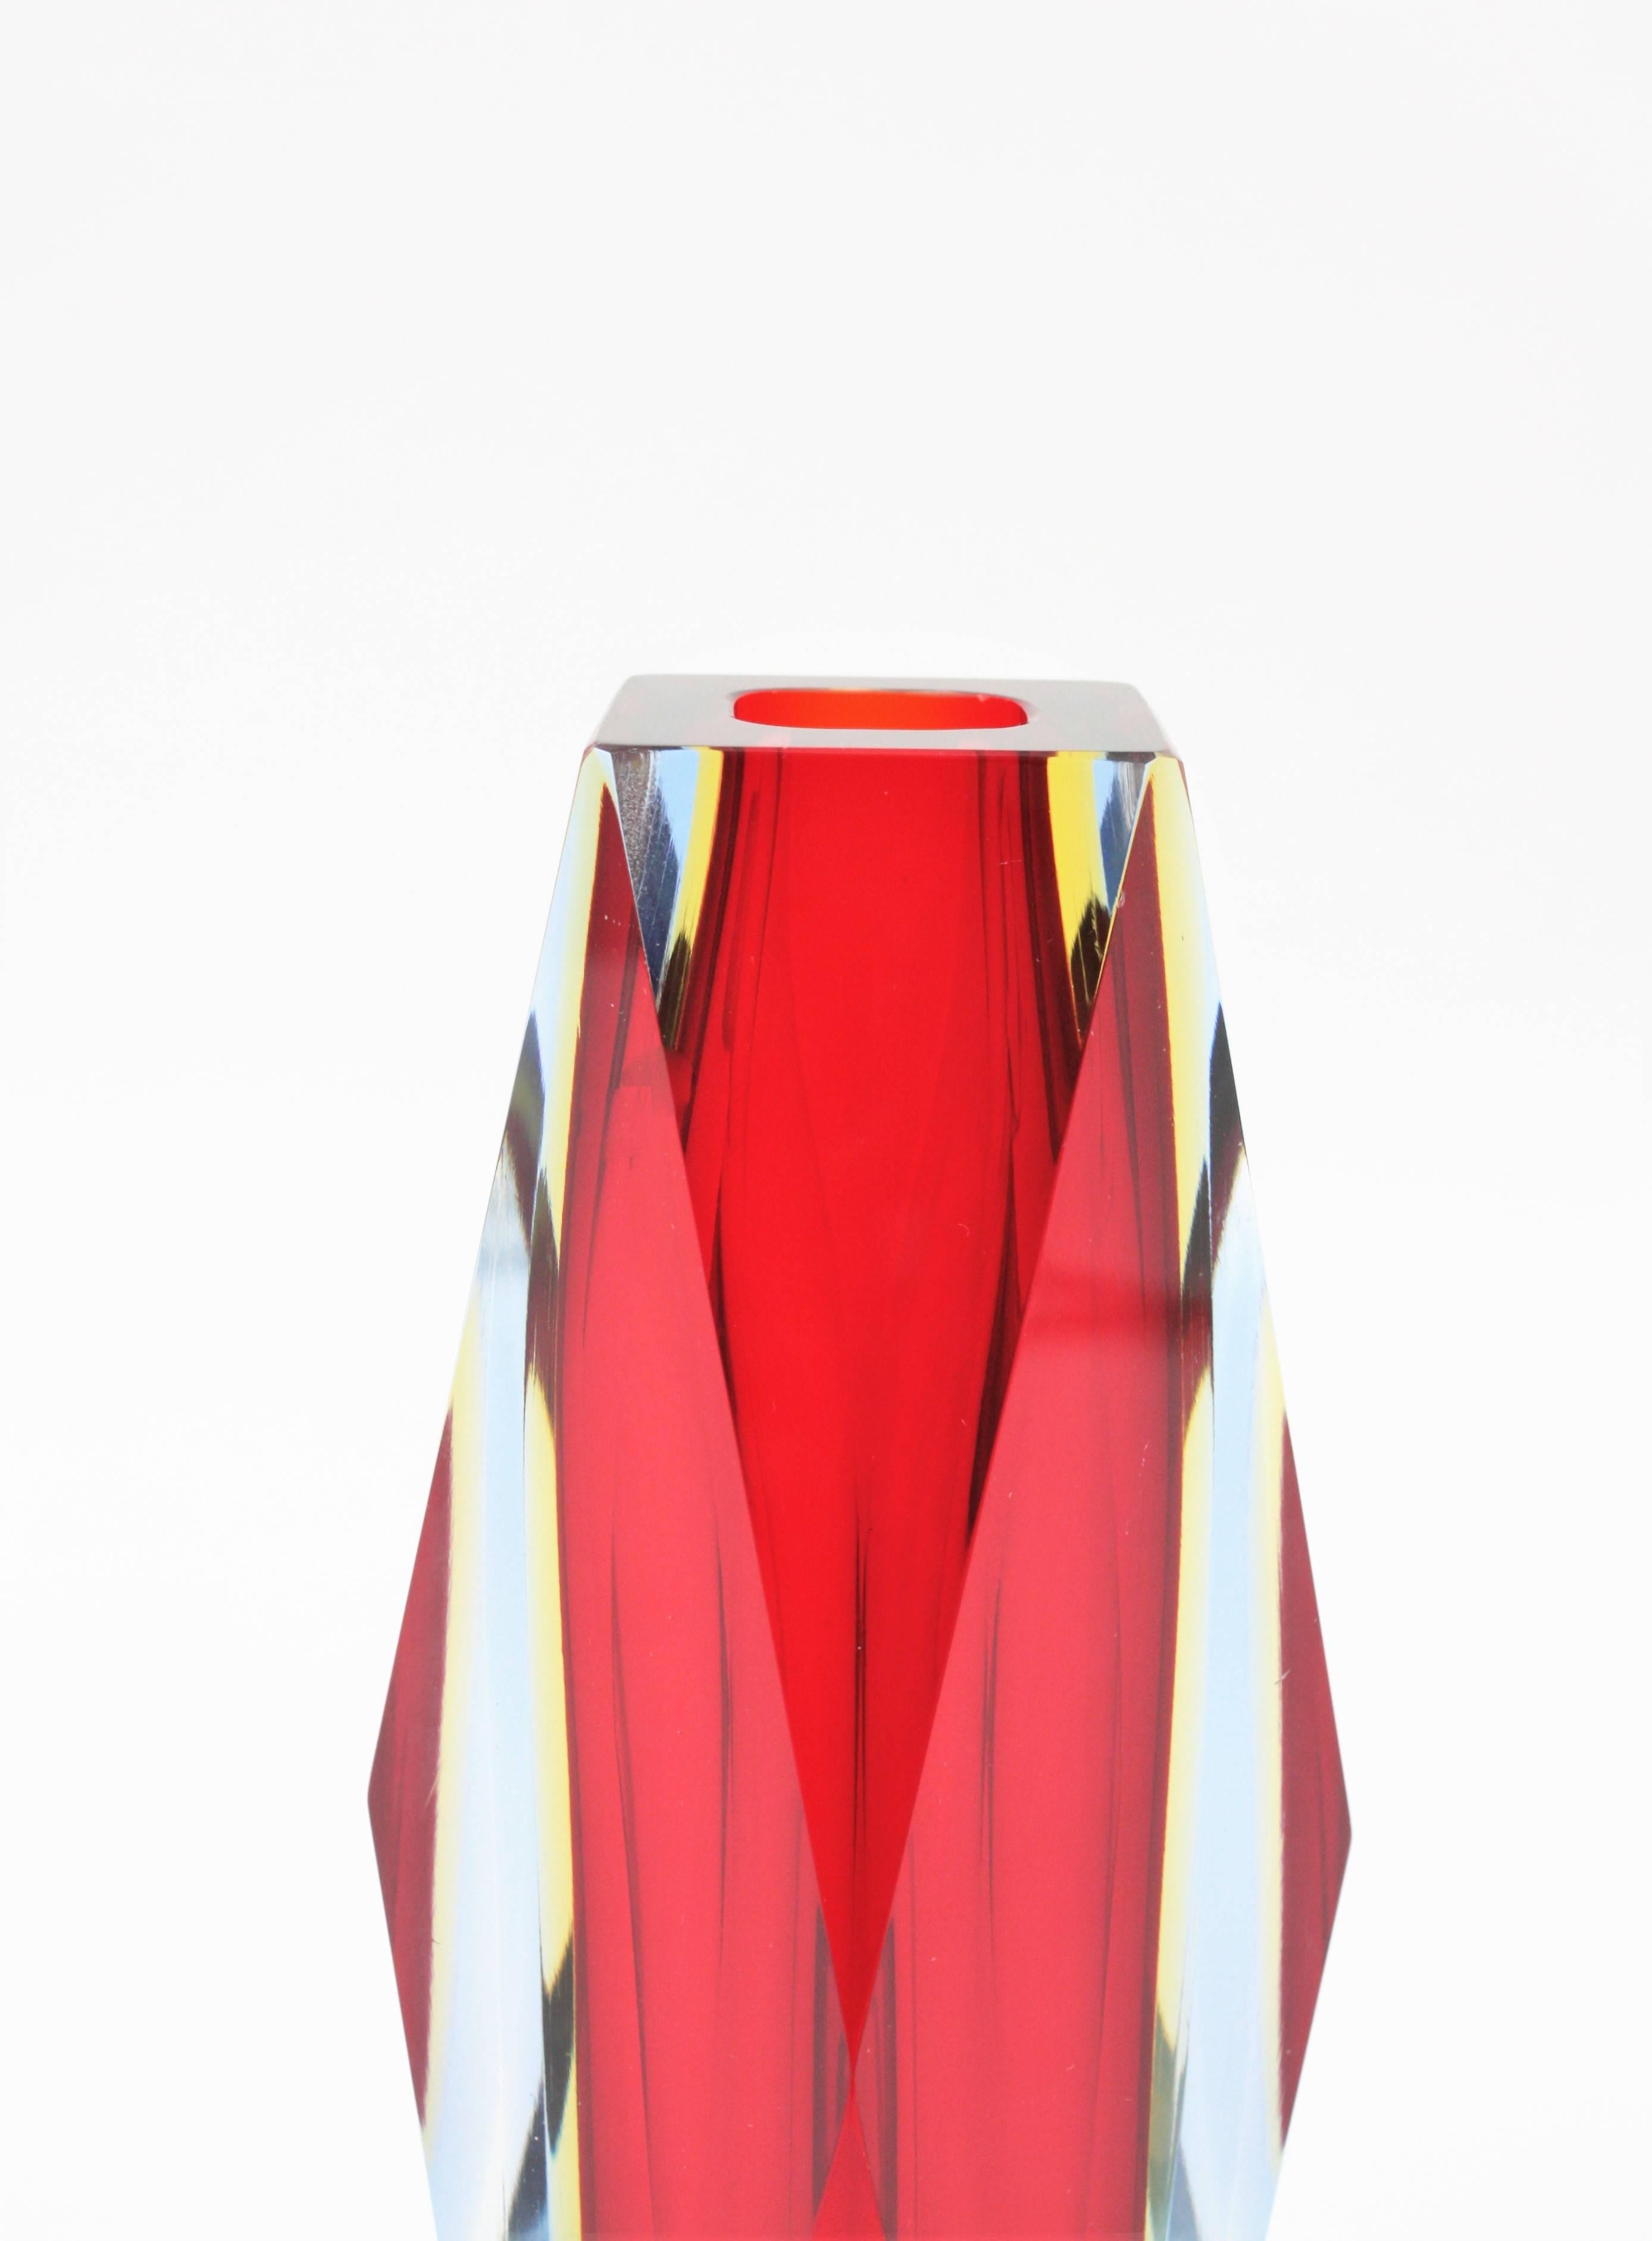 Mid-Century Modern Mandruzzato Murano Sommerso Red, Blue, Yellow & Clear Faceted Glass Vase, 1960s For Sale